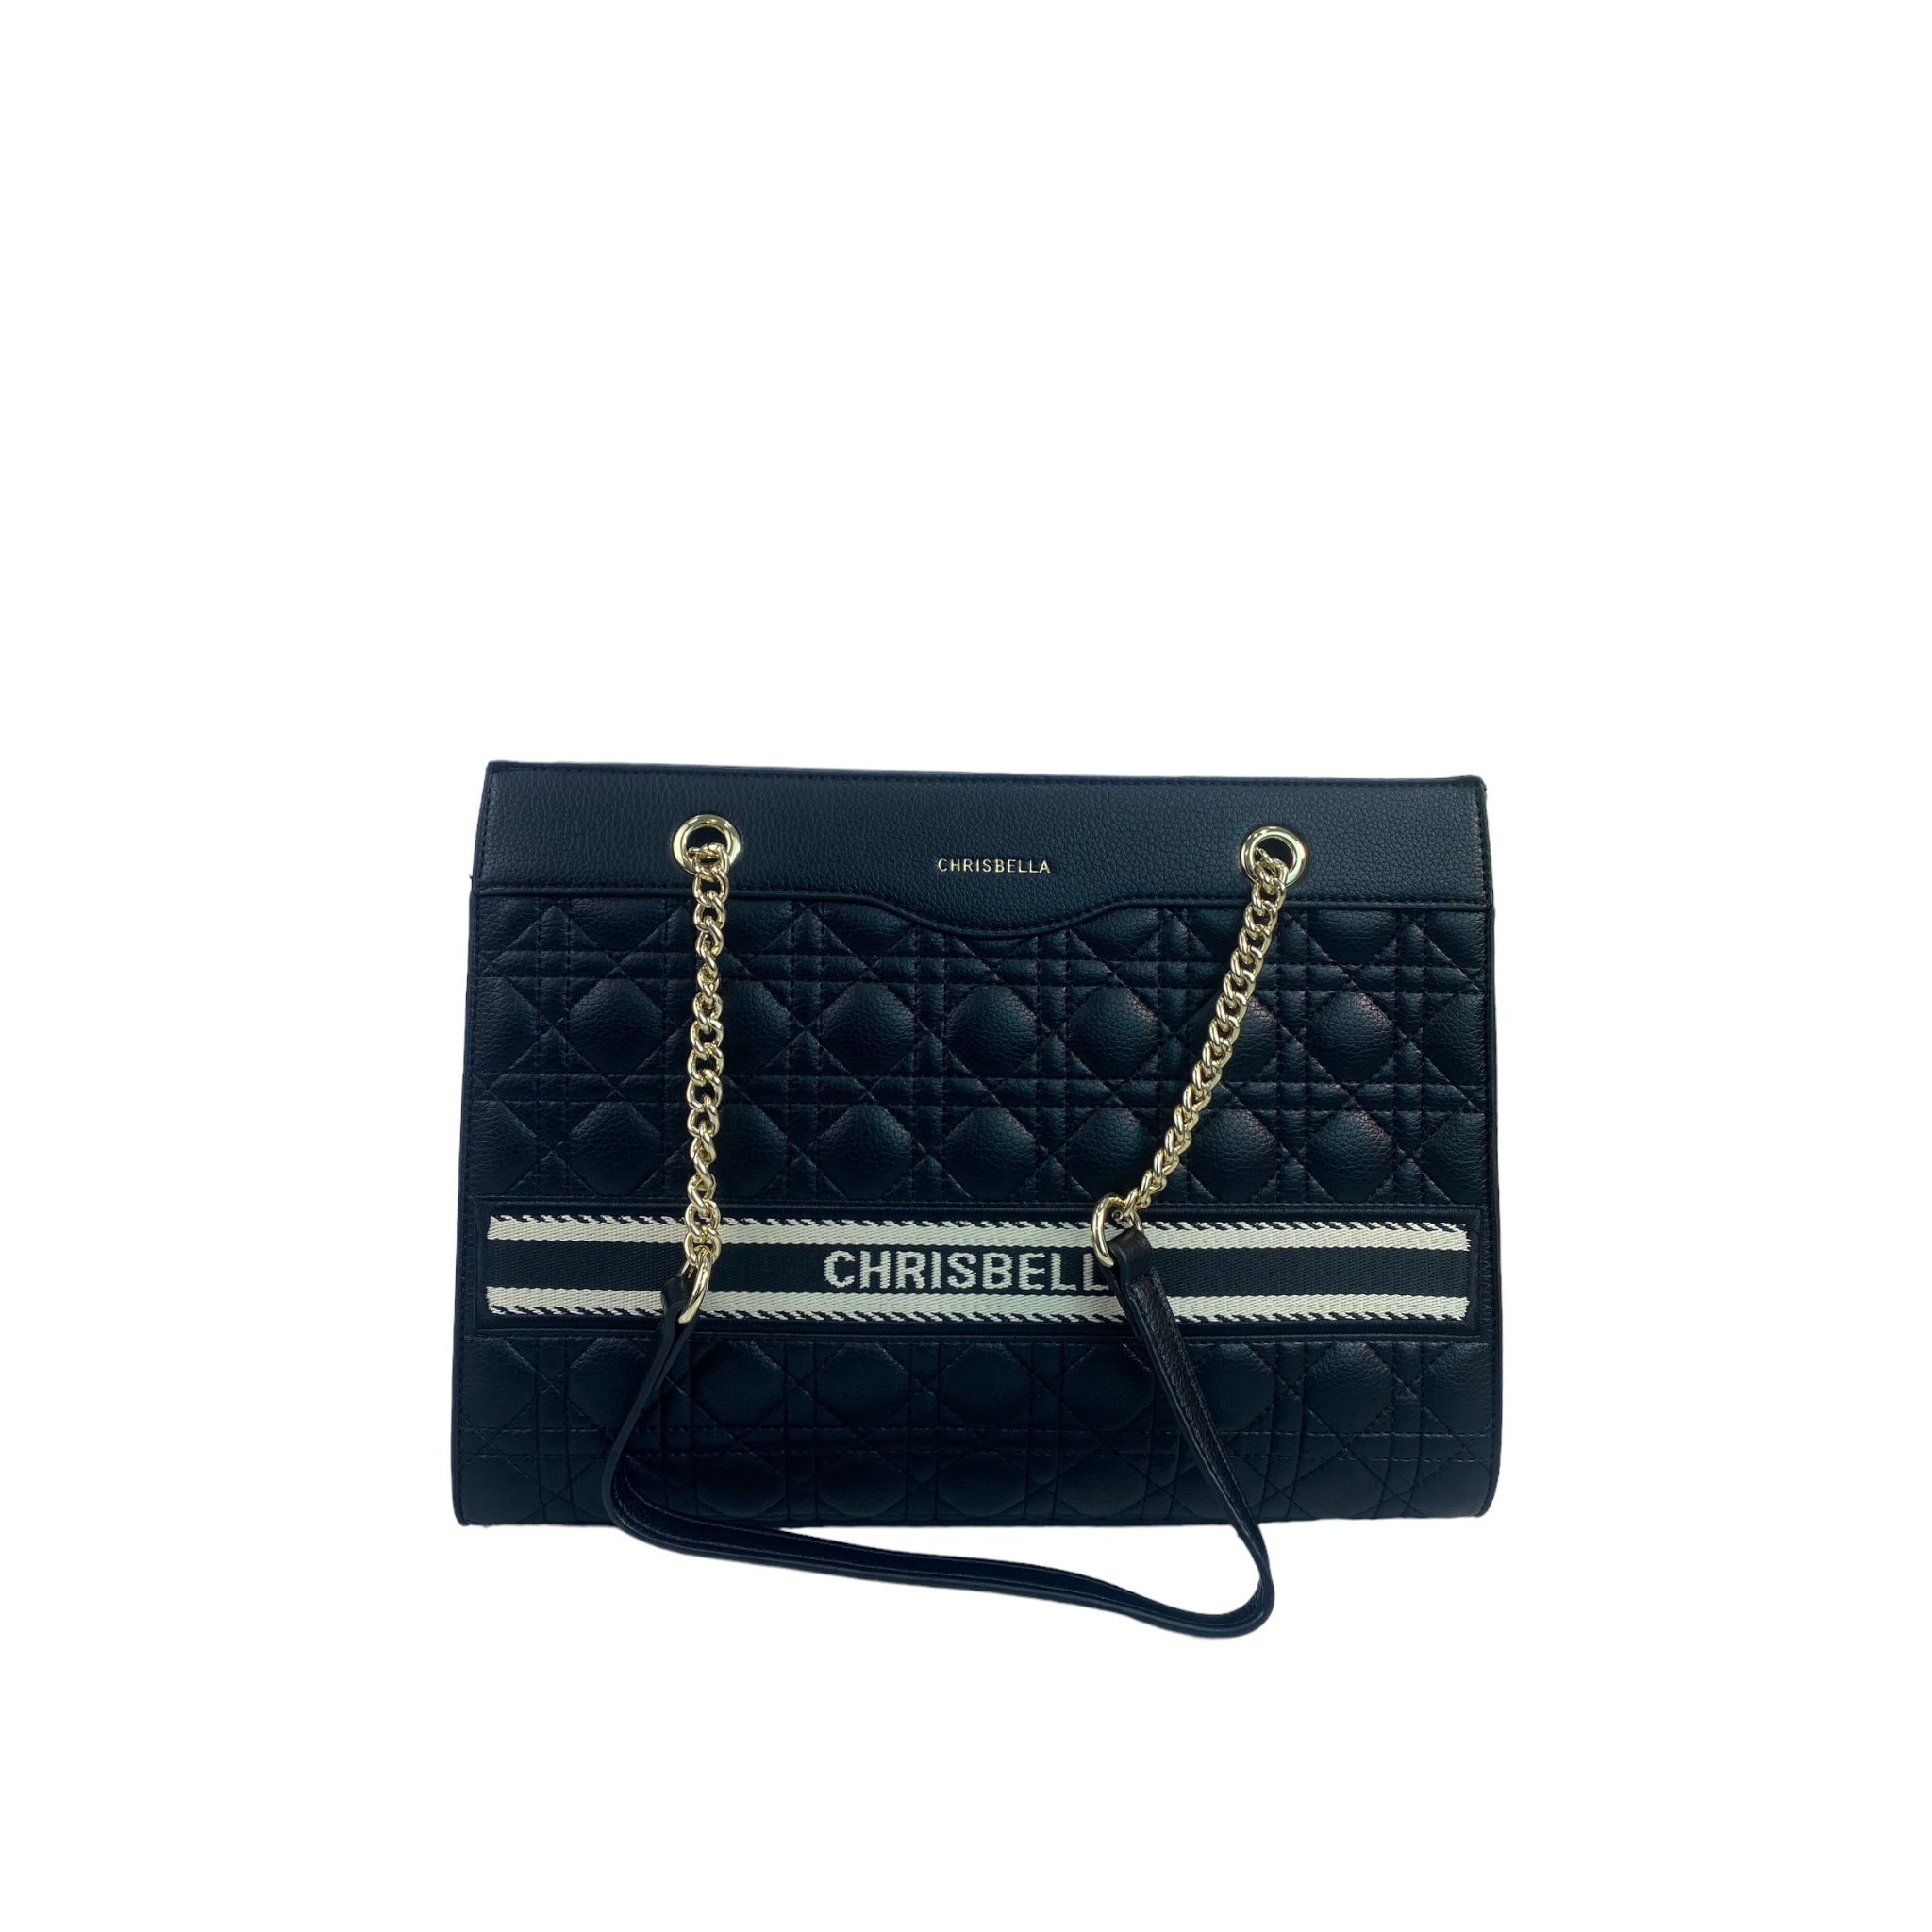 CHRISBELLA BLACK FAUX QUILTED FRONT CHAIN HANDLE BAG